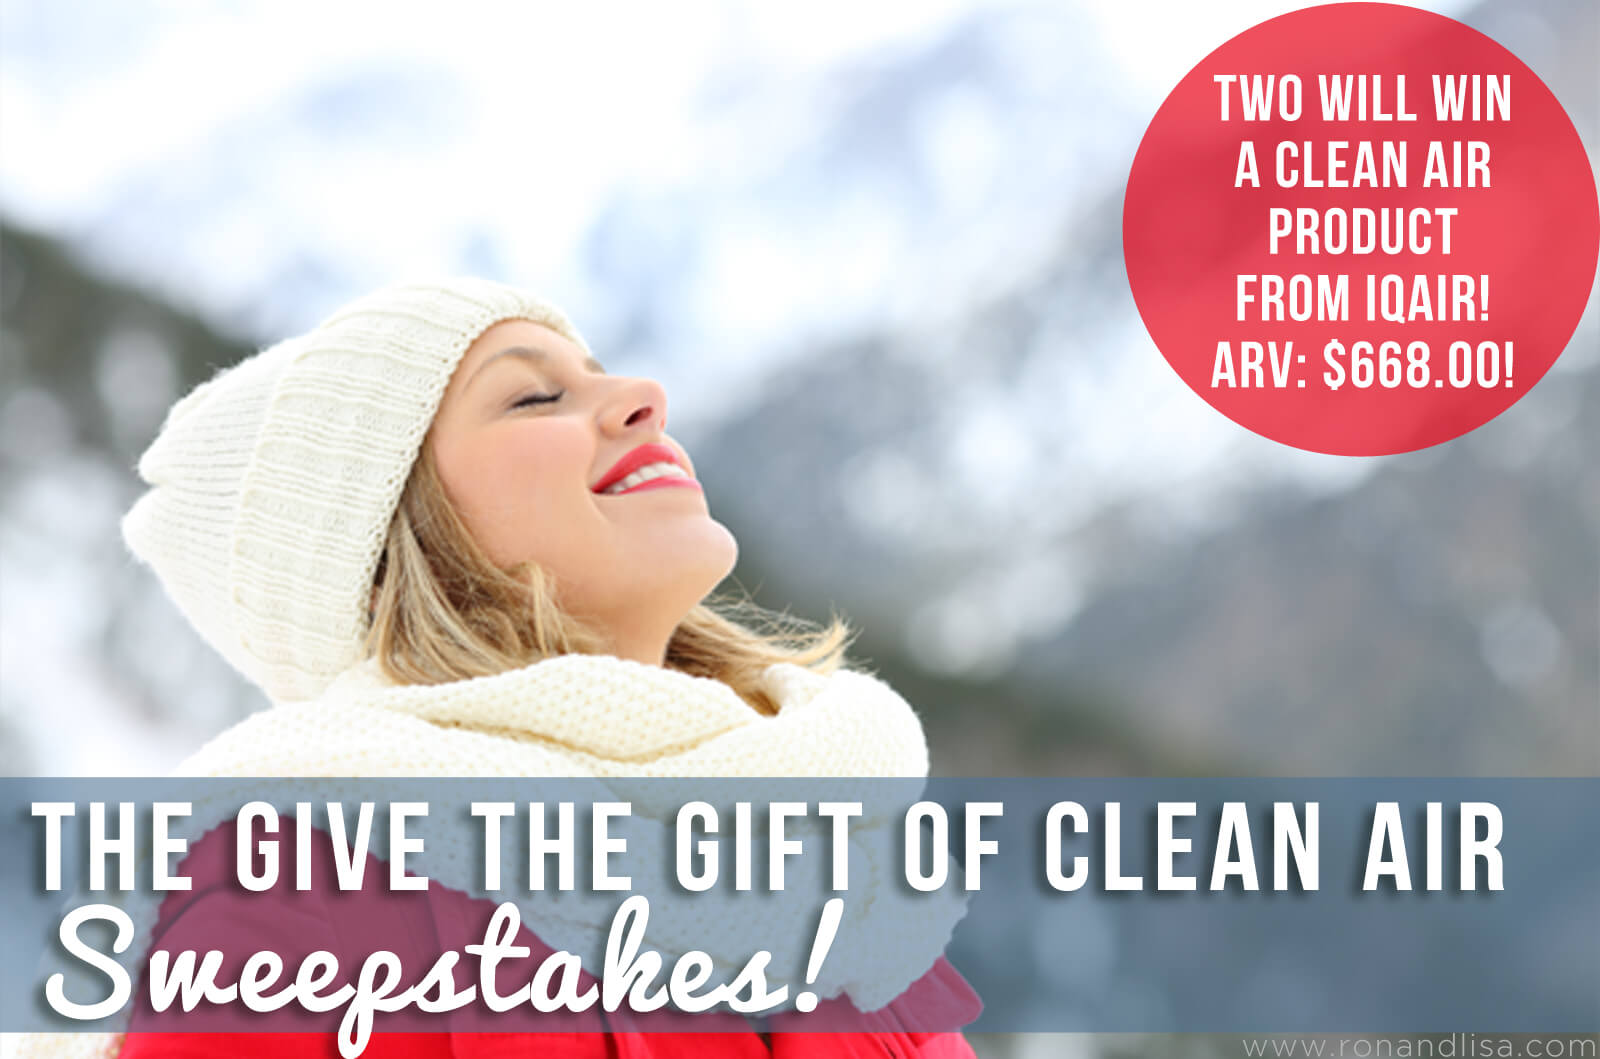 The Give The Gift Of Clean Air Sweepstakes!